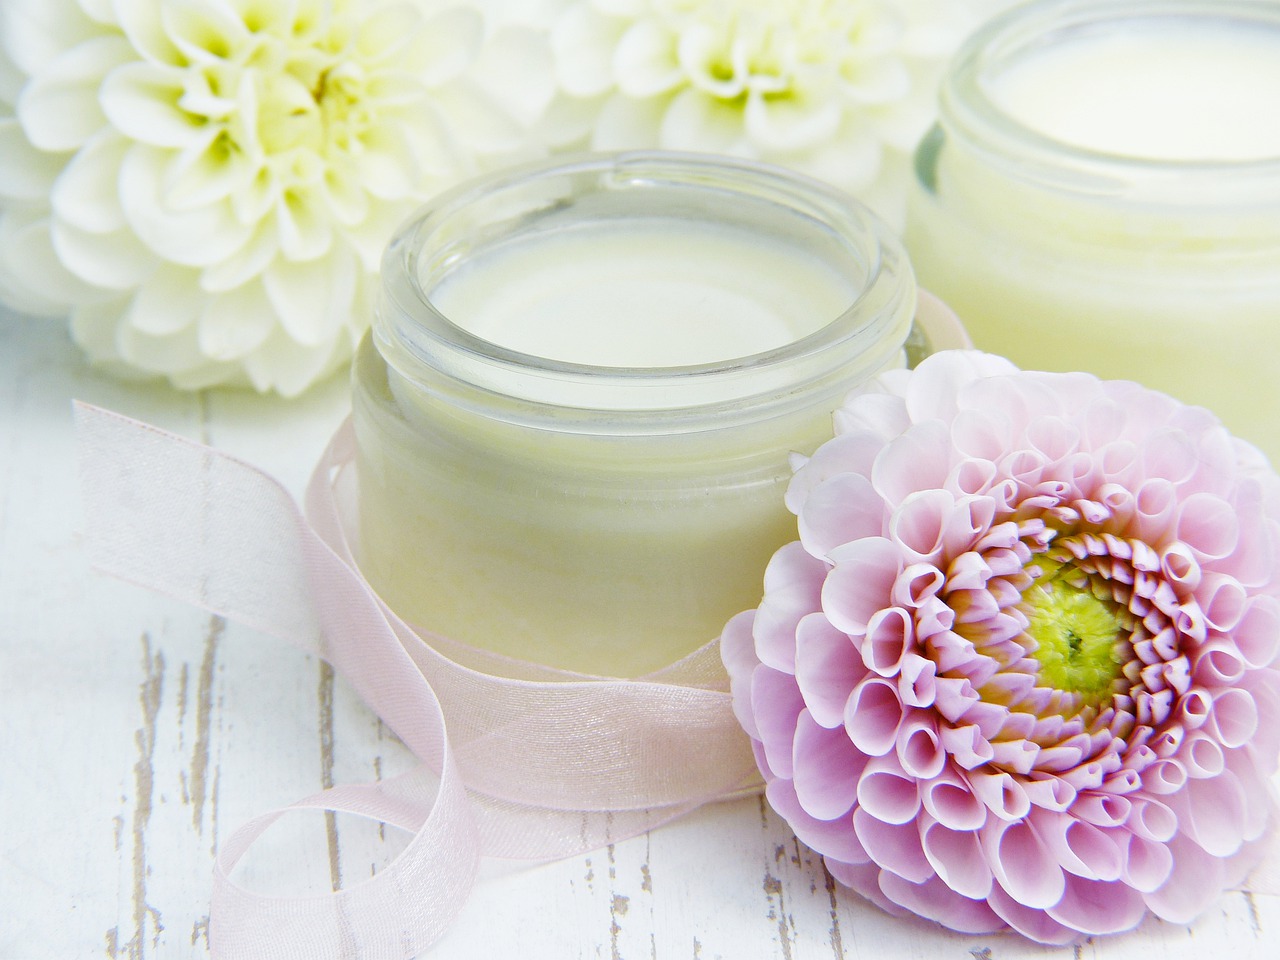 Ranking of the best creams for oily skin for 2022